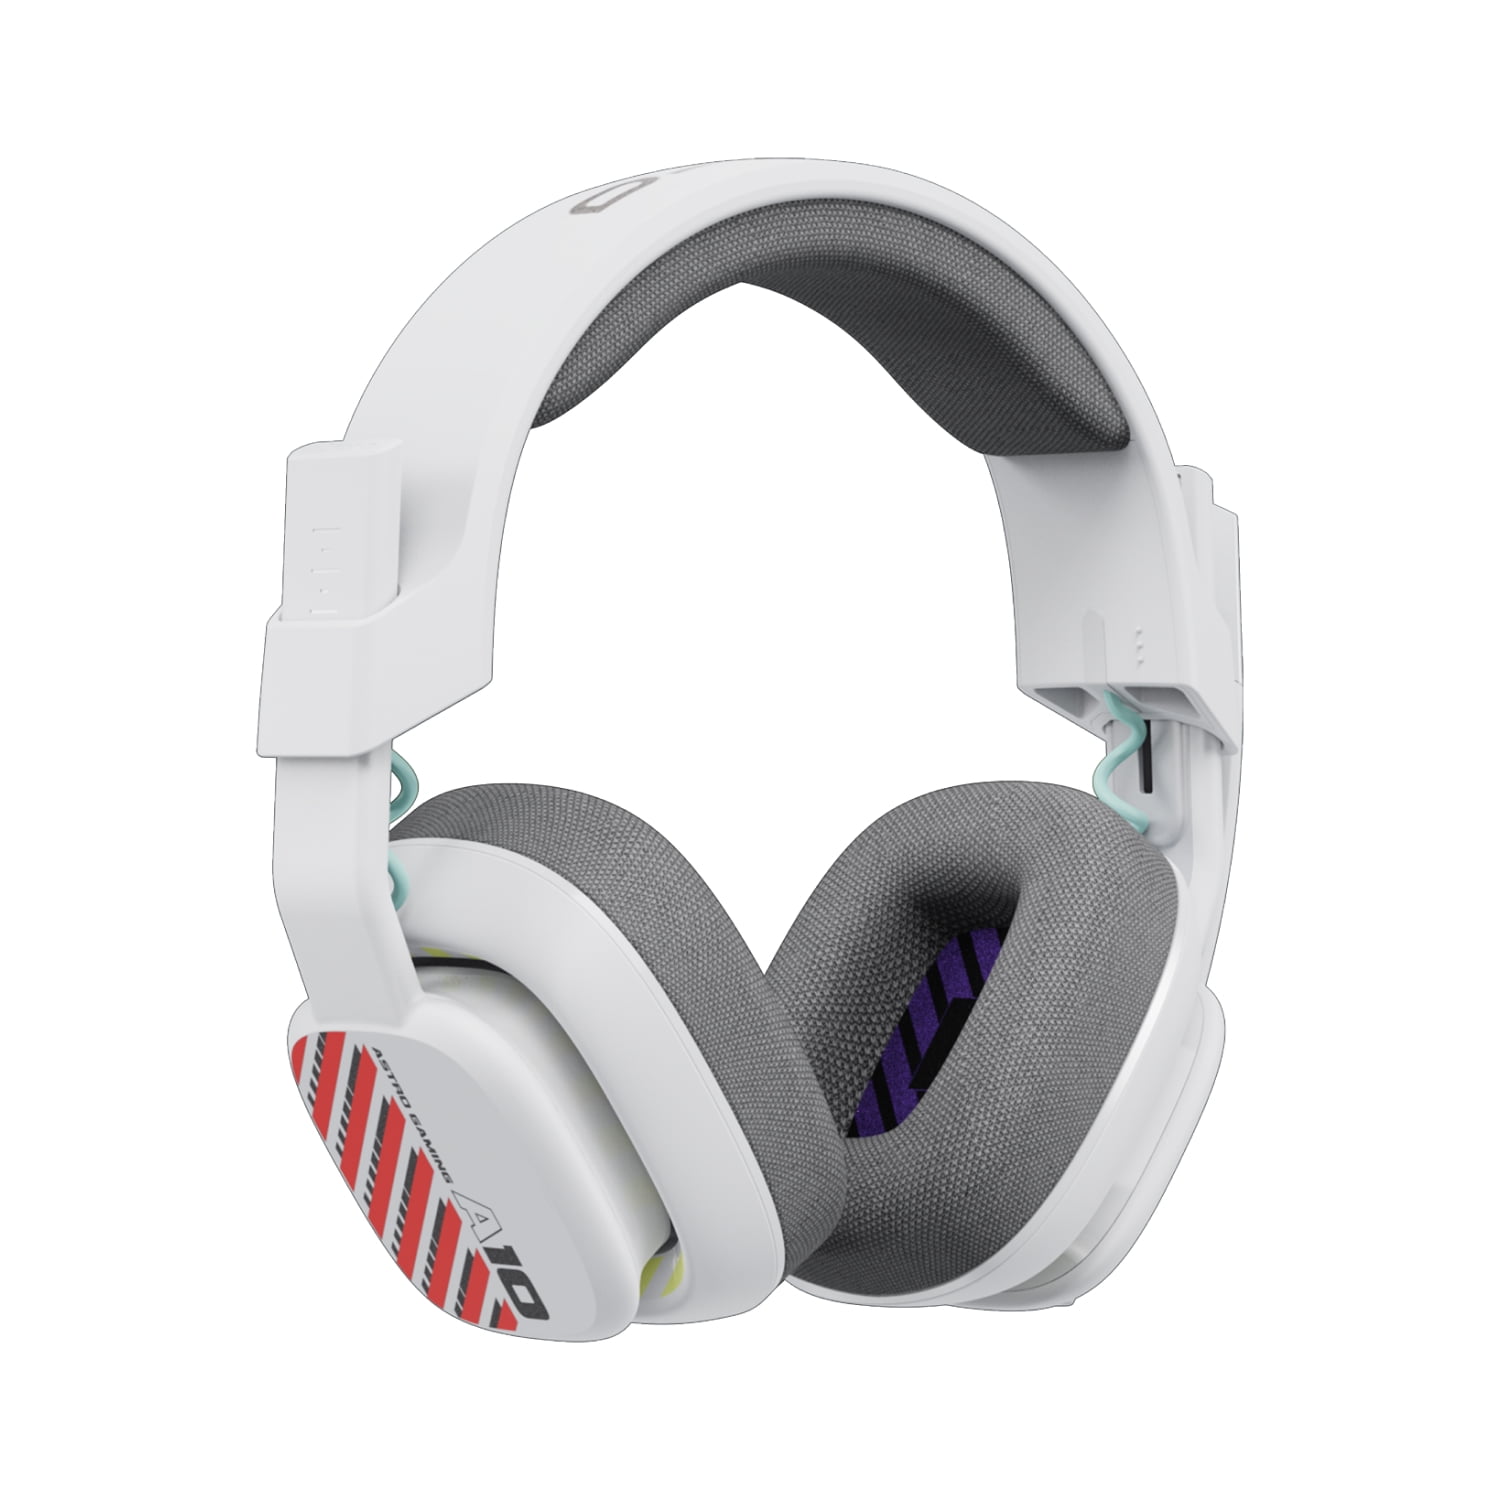 Voorstad rooster glans ASTRO A10 Gaming Headset Gen 2 Wired Headset - Over-ear gaming headphones  with flip-to-mute microphone, 32 mm drivers, compatible with PlayStation, PC,  White - Walmart.com